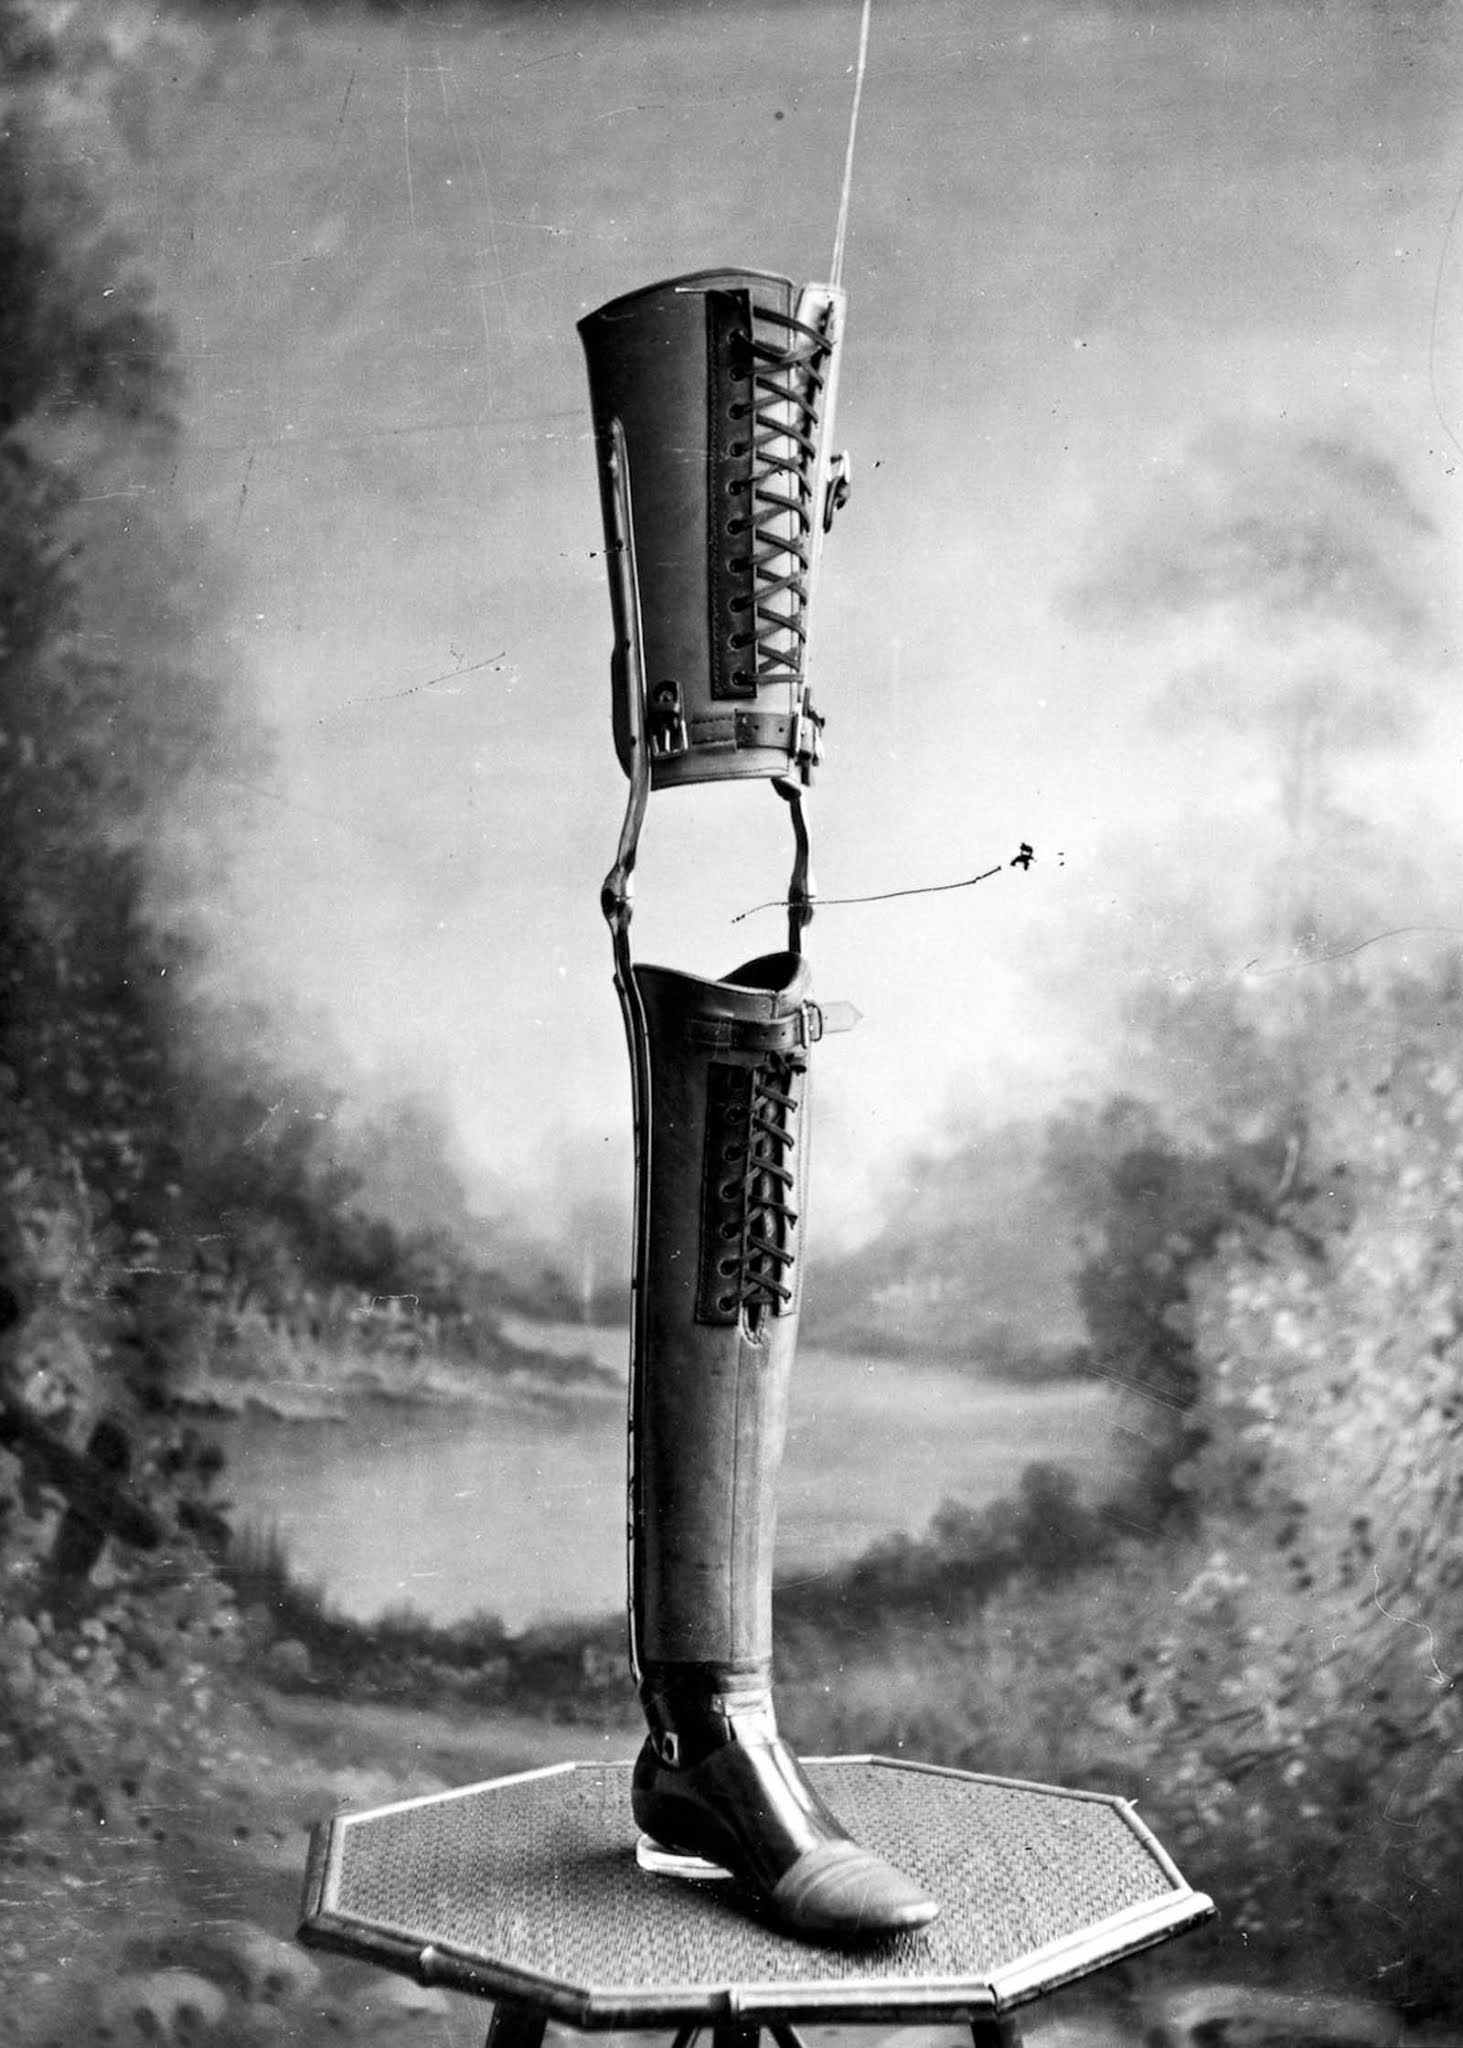 The extraordinary early prostheses made by James Gillingham, 1900